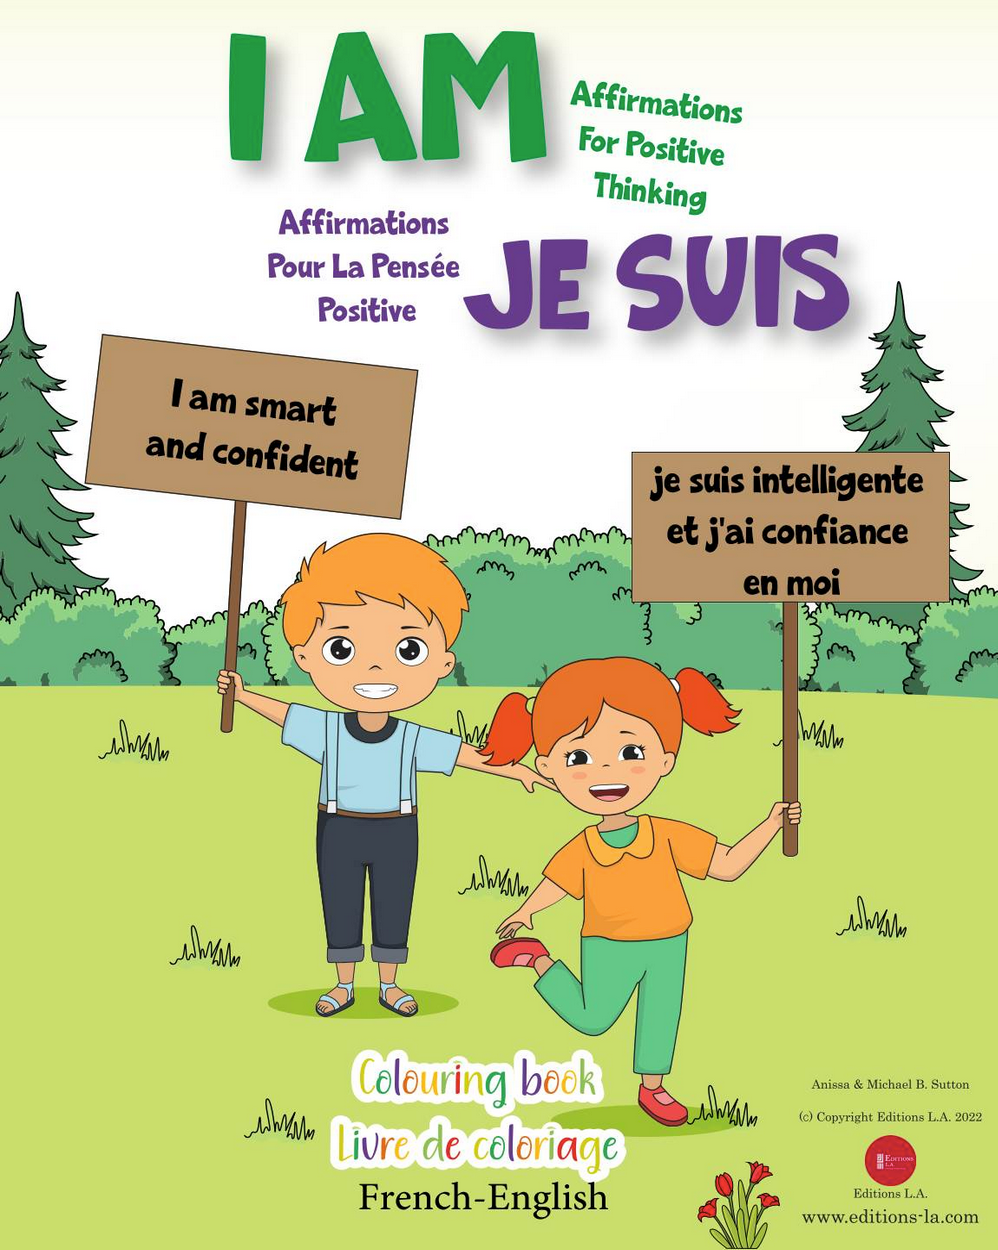 I am affirmations for positive thinking coloring book french english